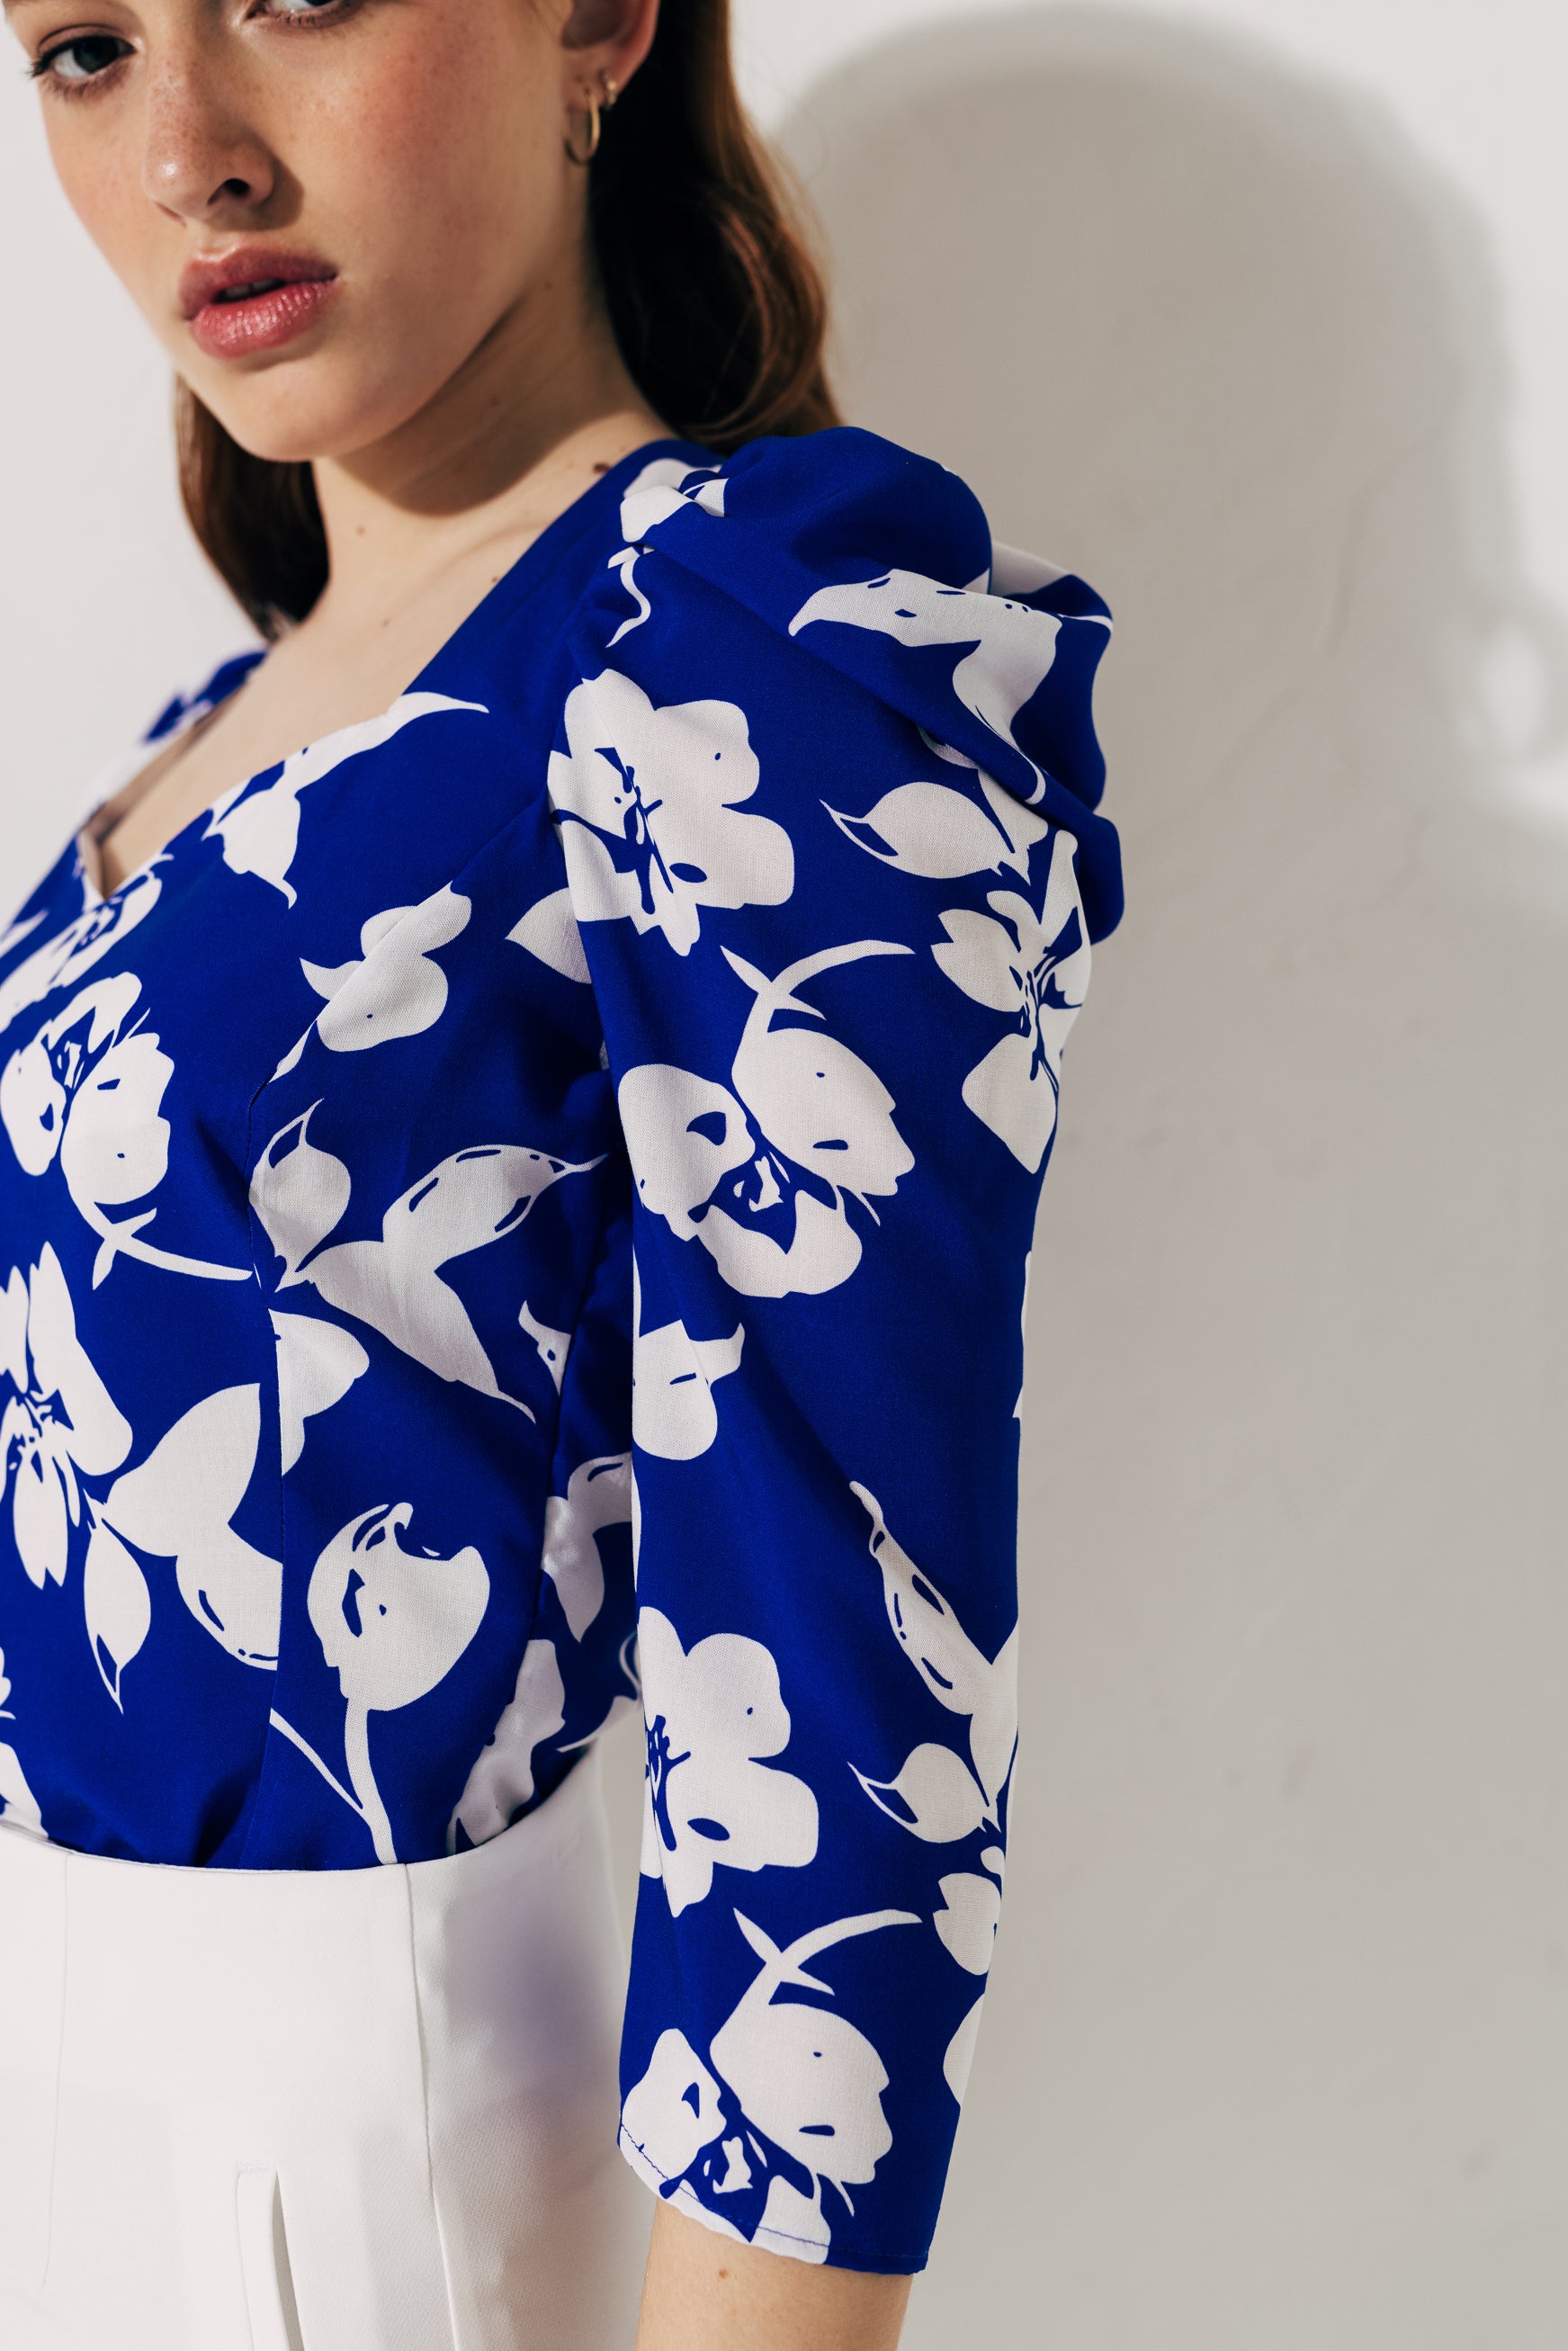 100% Viscose blouse with puffed shoulders and heart neckline